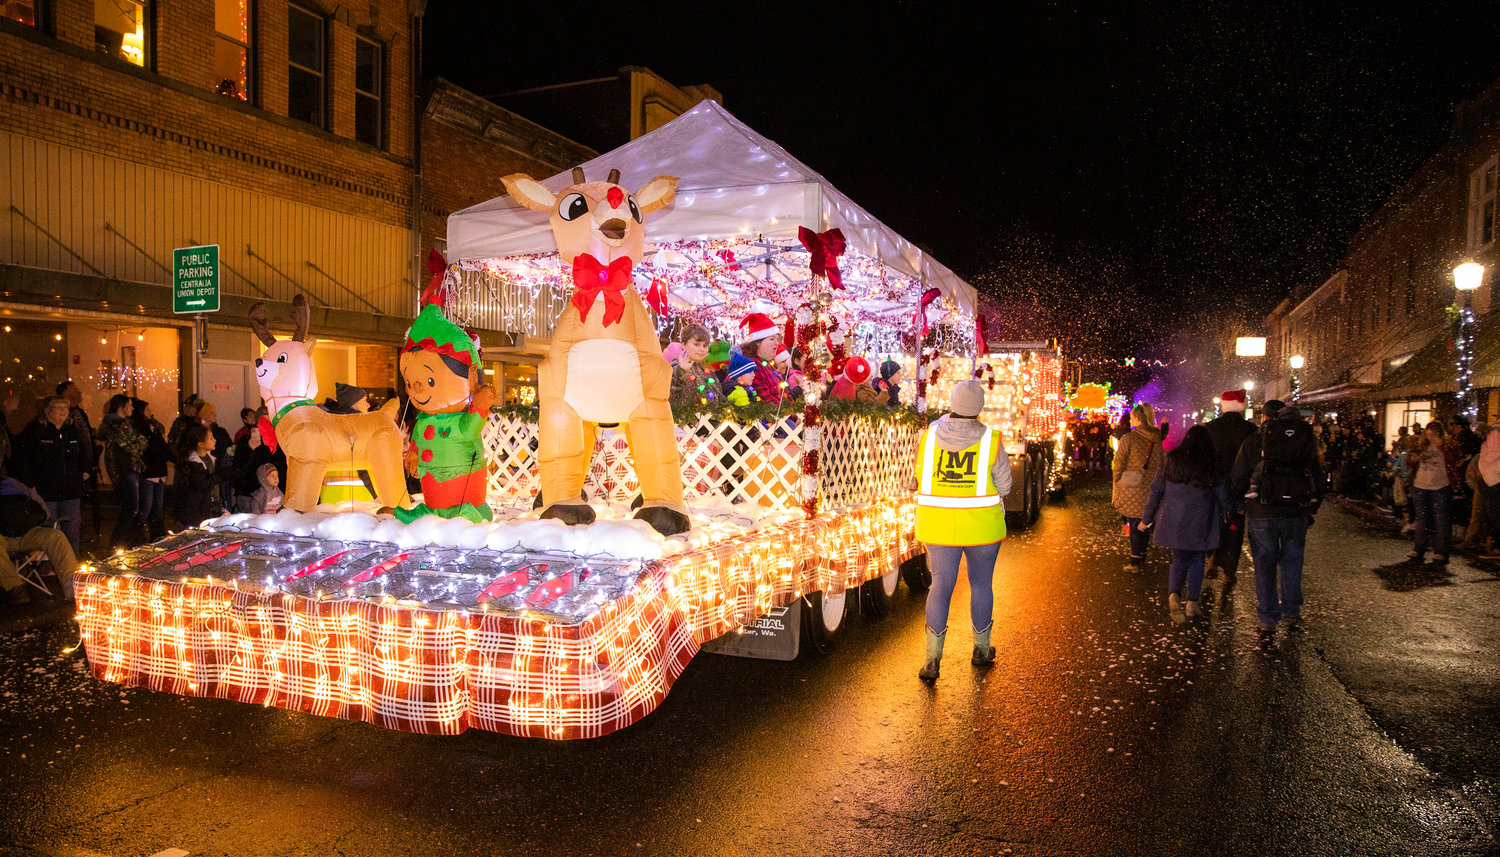 Fake snow falls as crowds gather for the Lighted Tractor Parade Saturday night in downtown Centralia.